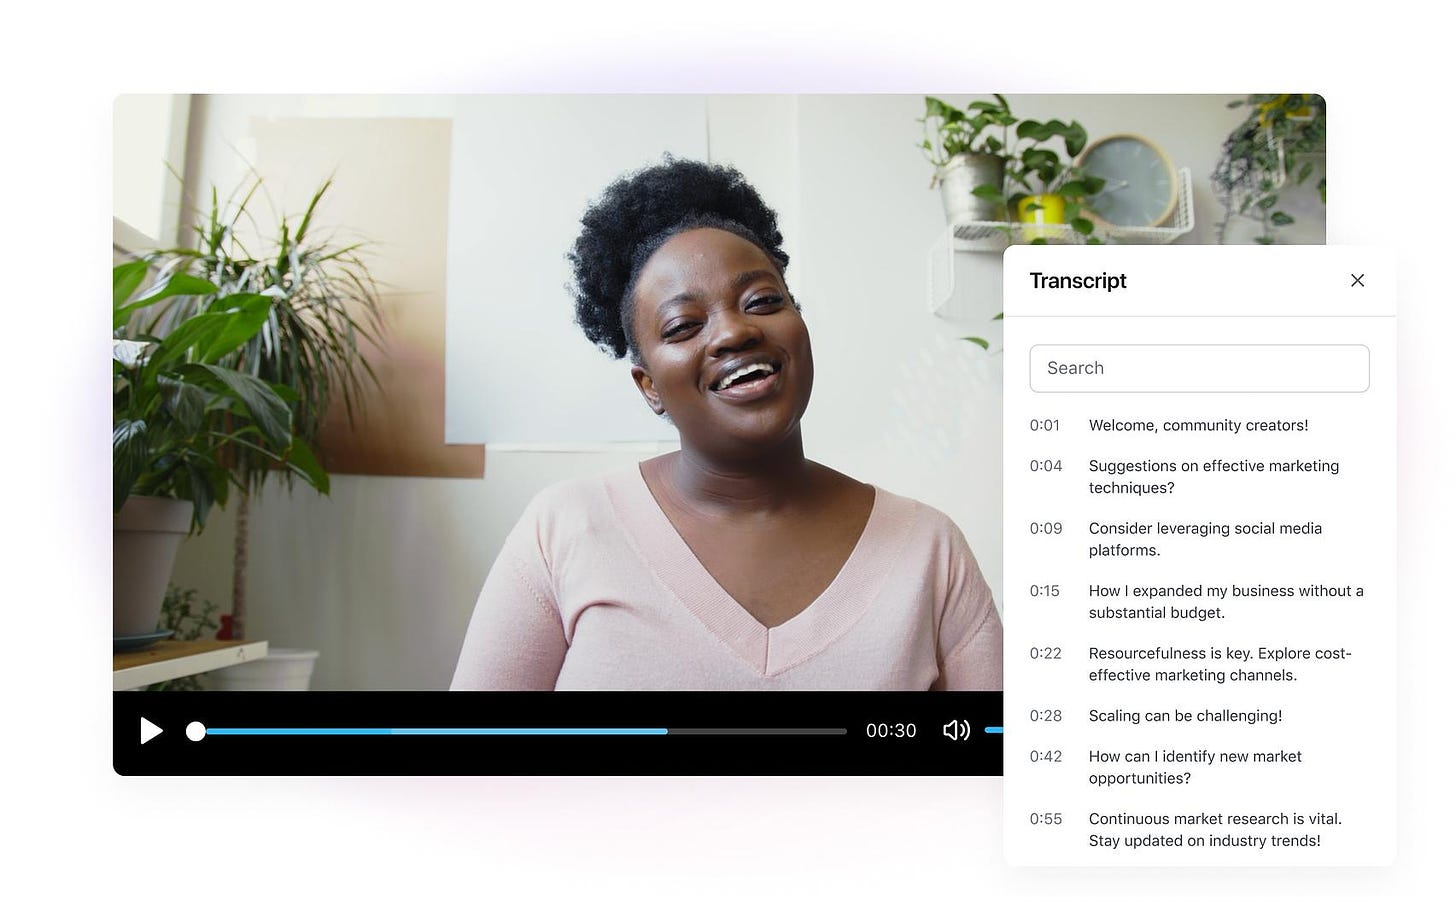 Screenshot of a video of a woman speaking with plants and a white wall behind her. On the right is a popup screen of the transcript.